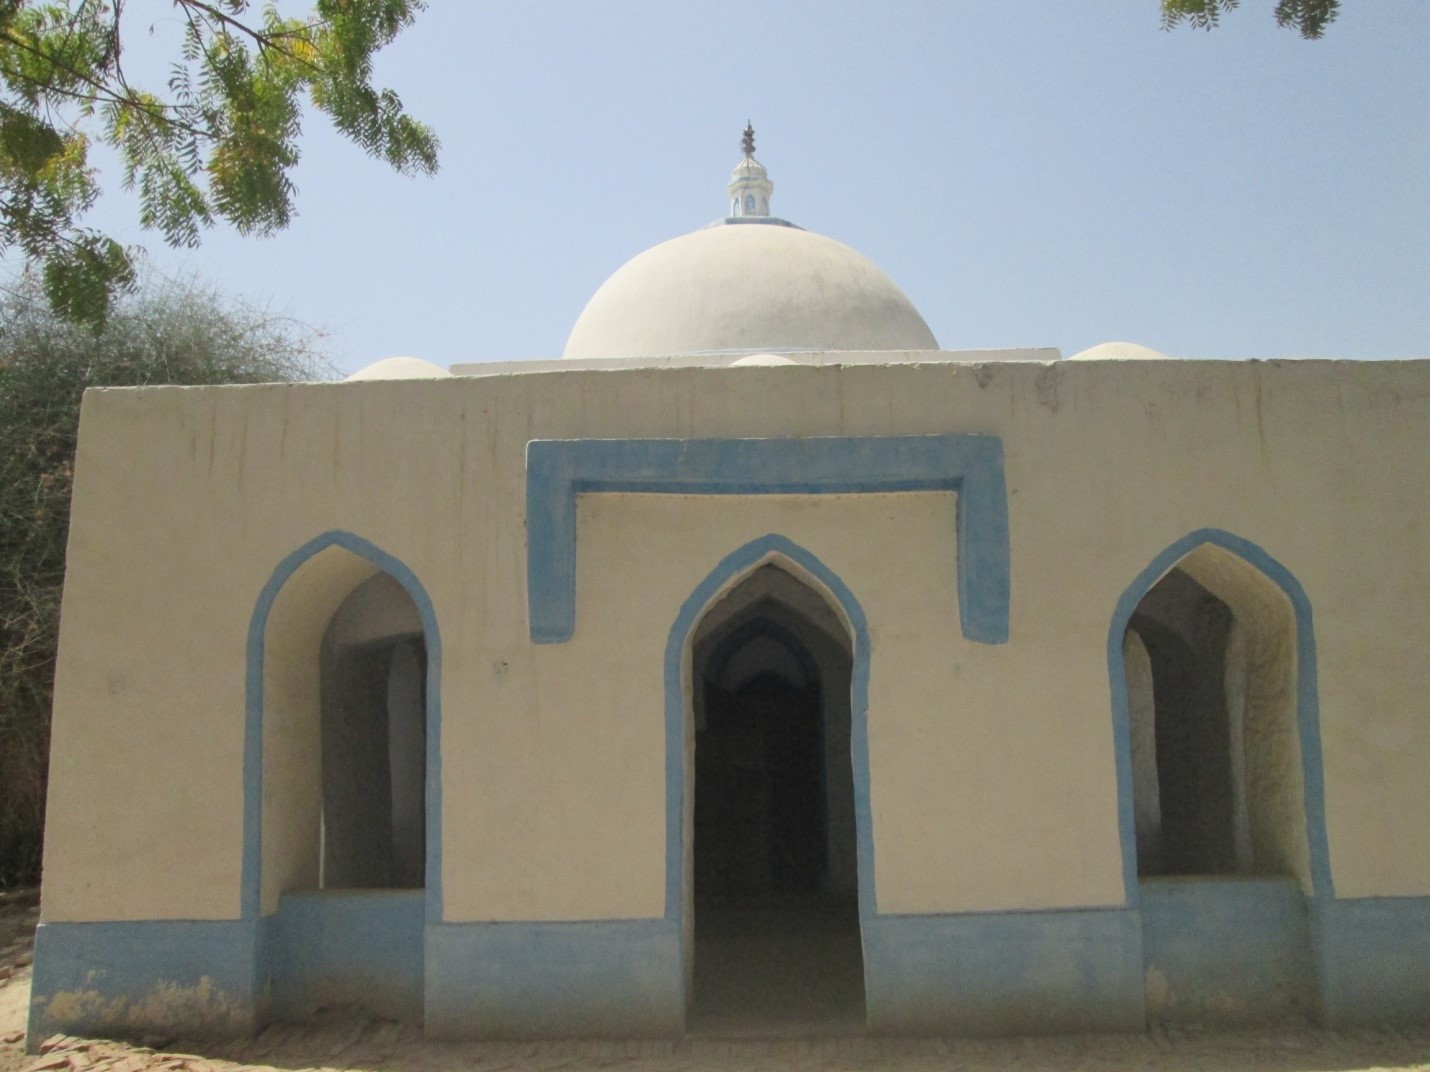 Bahlani- Front view of tomb from Mausoleum where females are buried